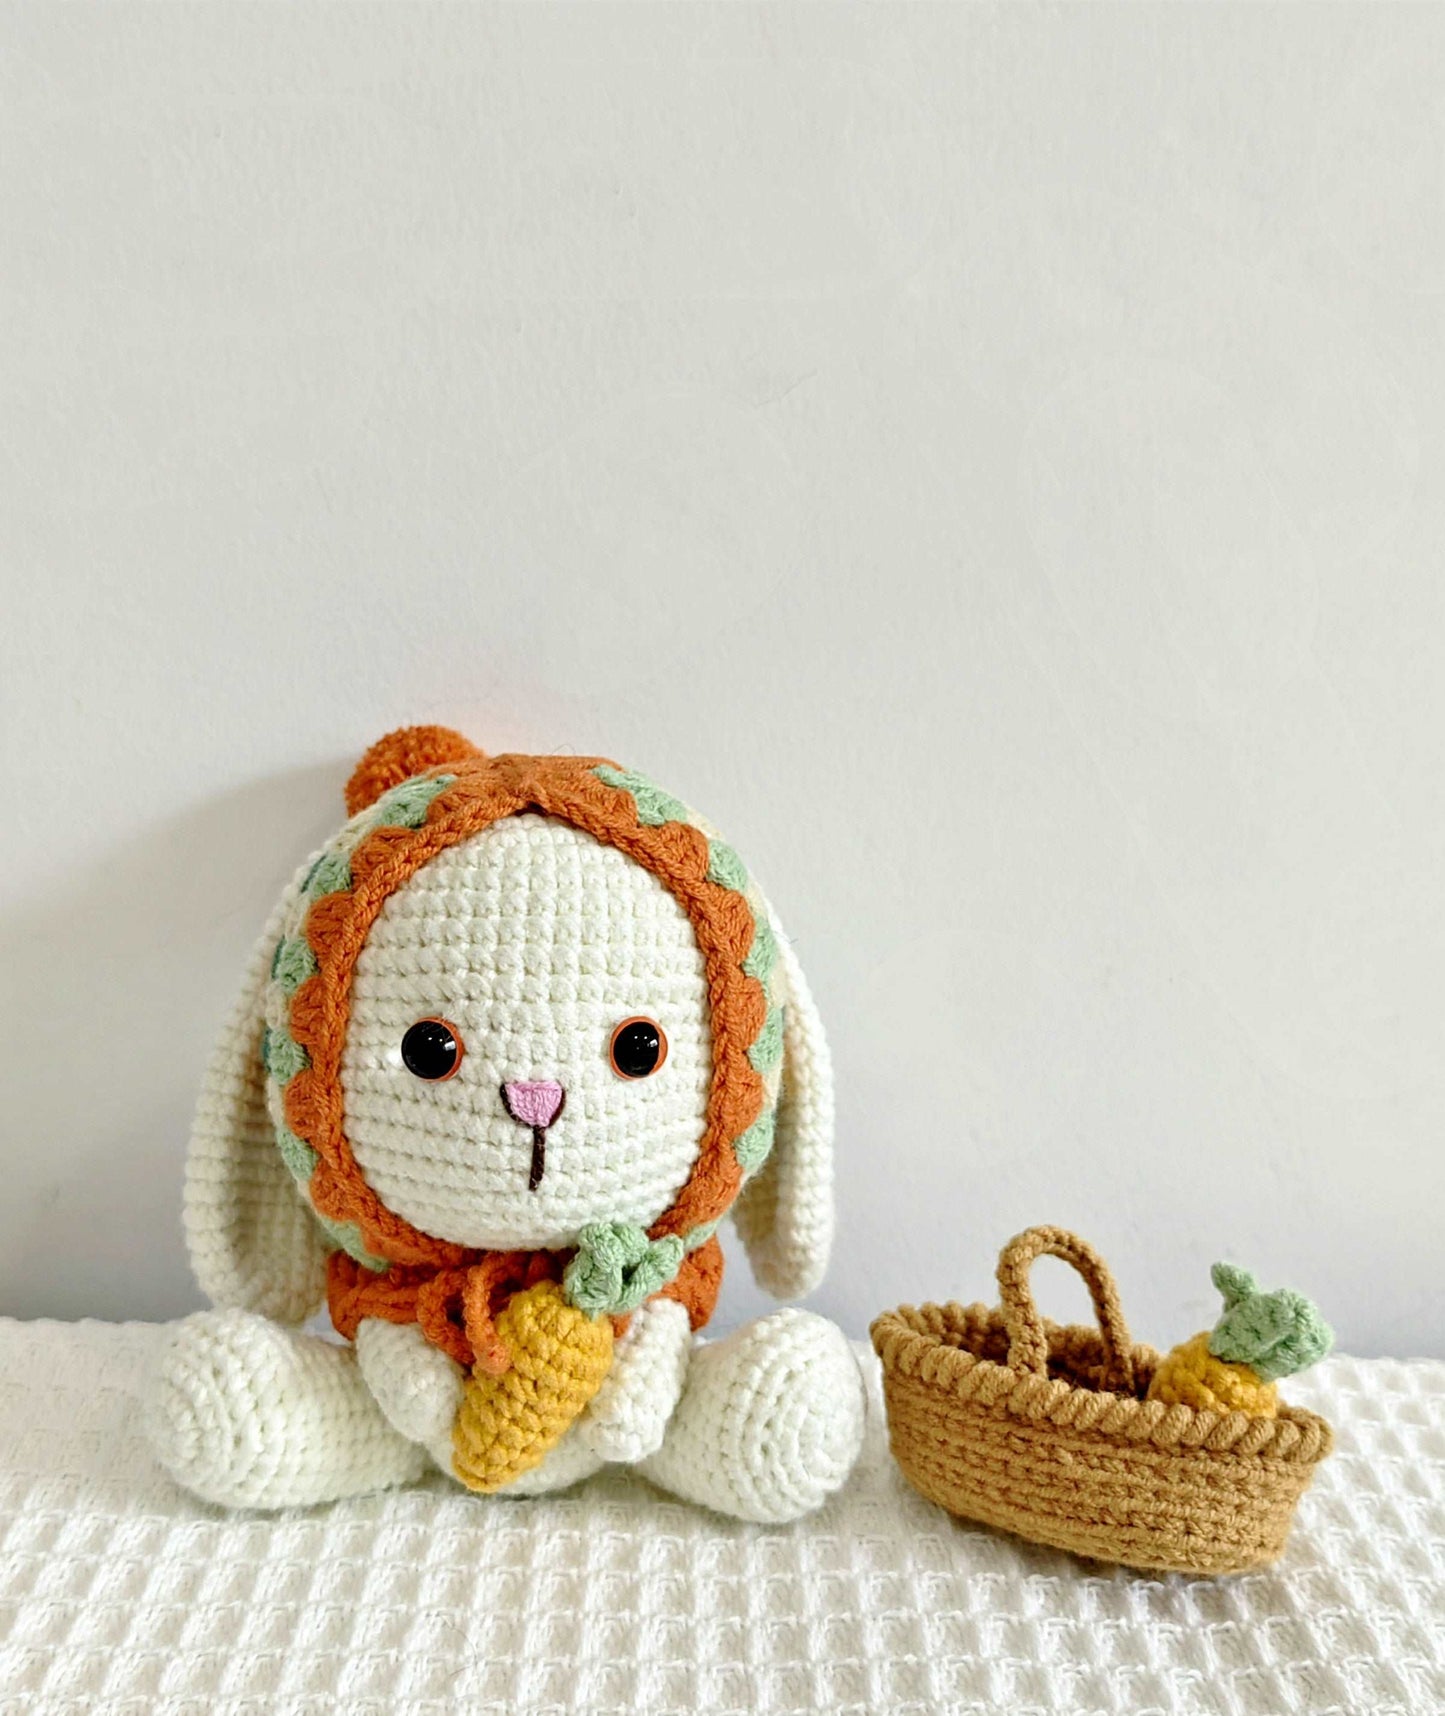 Exquisite Crocheted Rabbit Figurine for Holiday Decor